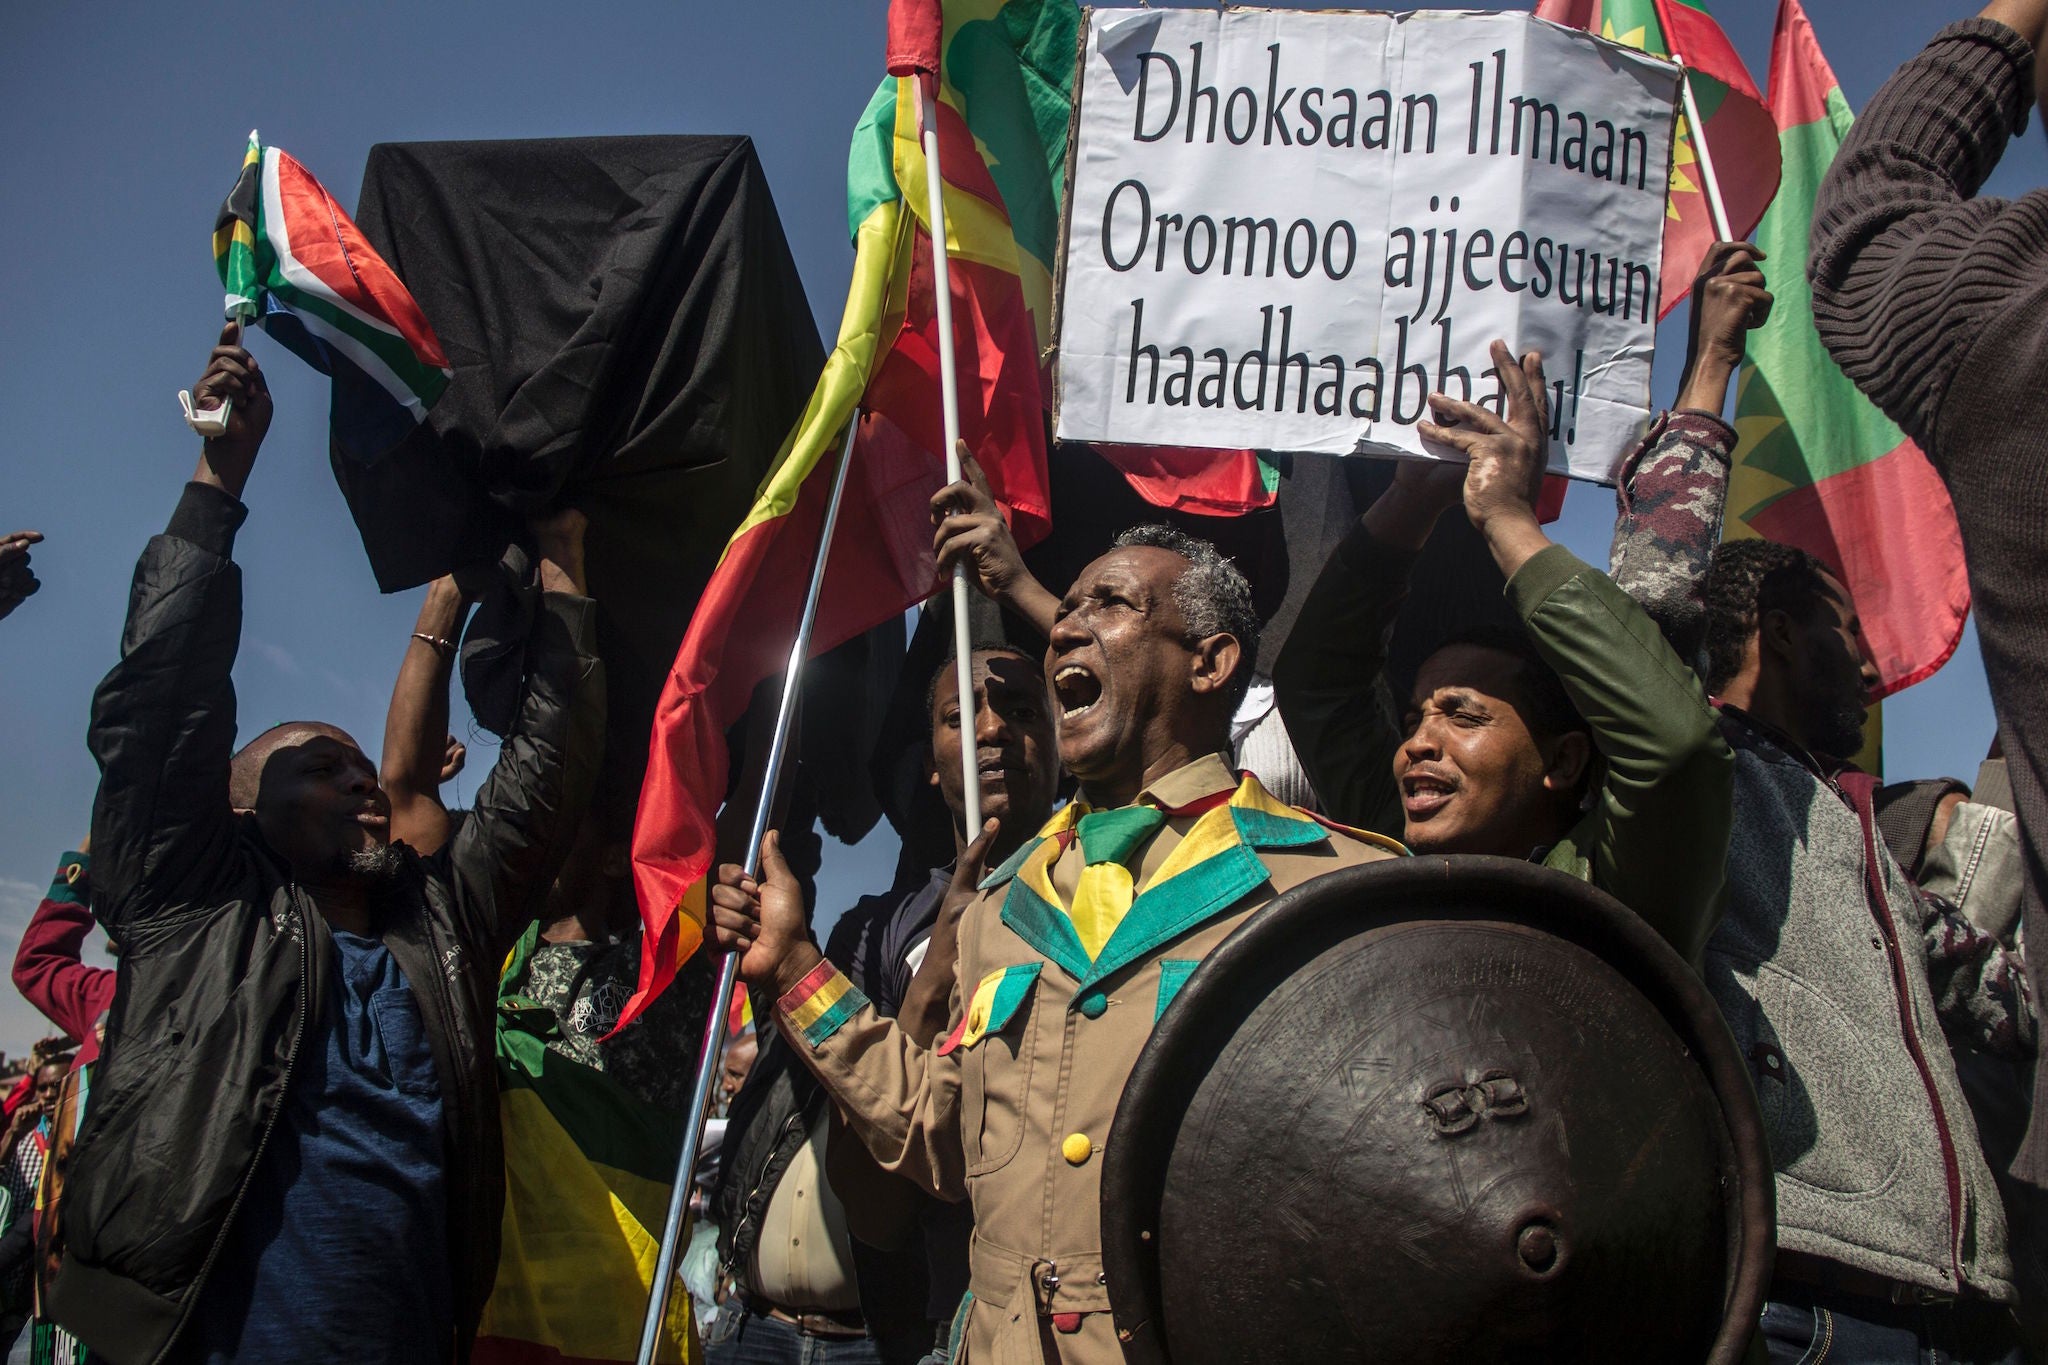 Members of the Oromo, Ogaden and Amhara community in South Africa demonstrate against the ongoing crackdown in the restive Oromo and Amhara region of Ethiopia on August 18, 2016